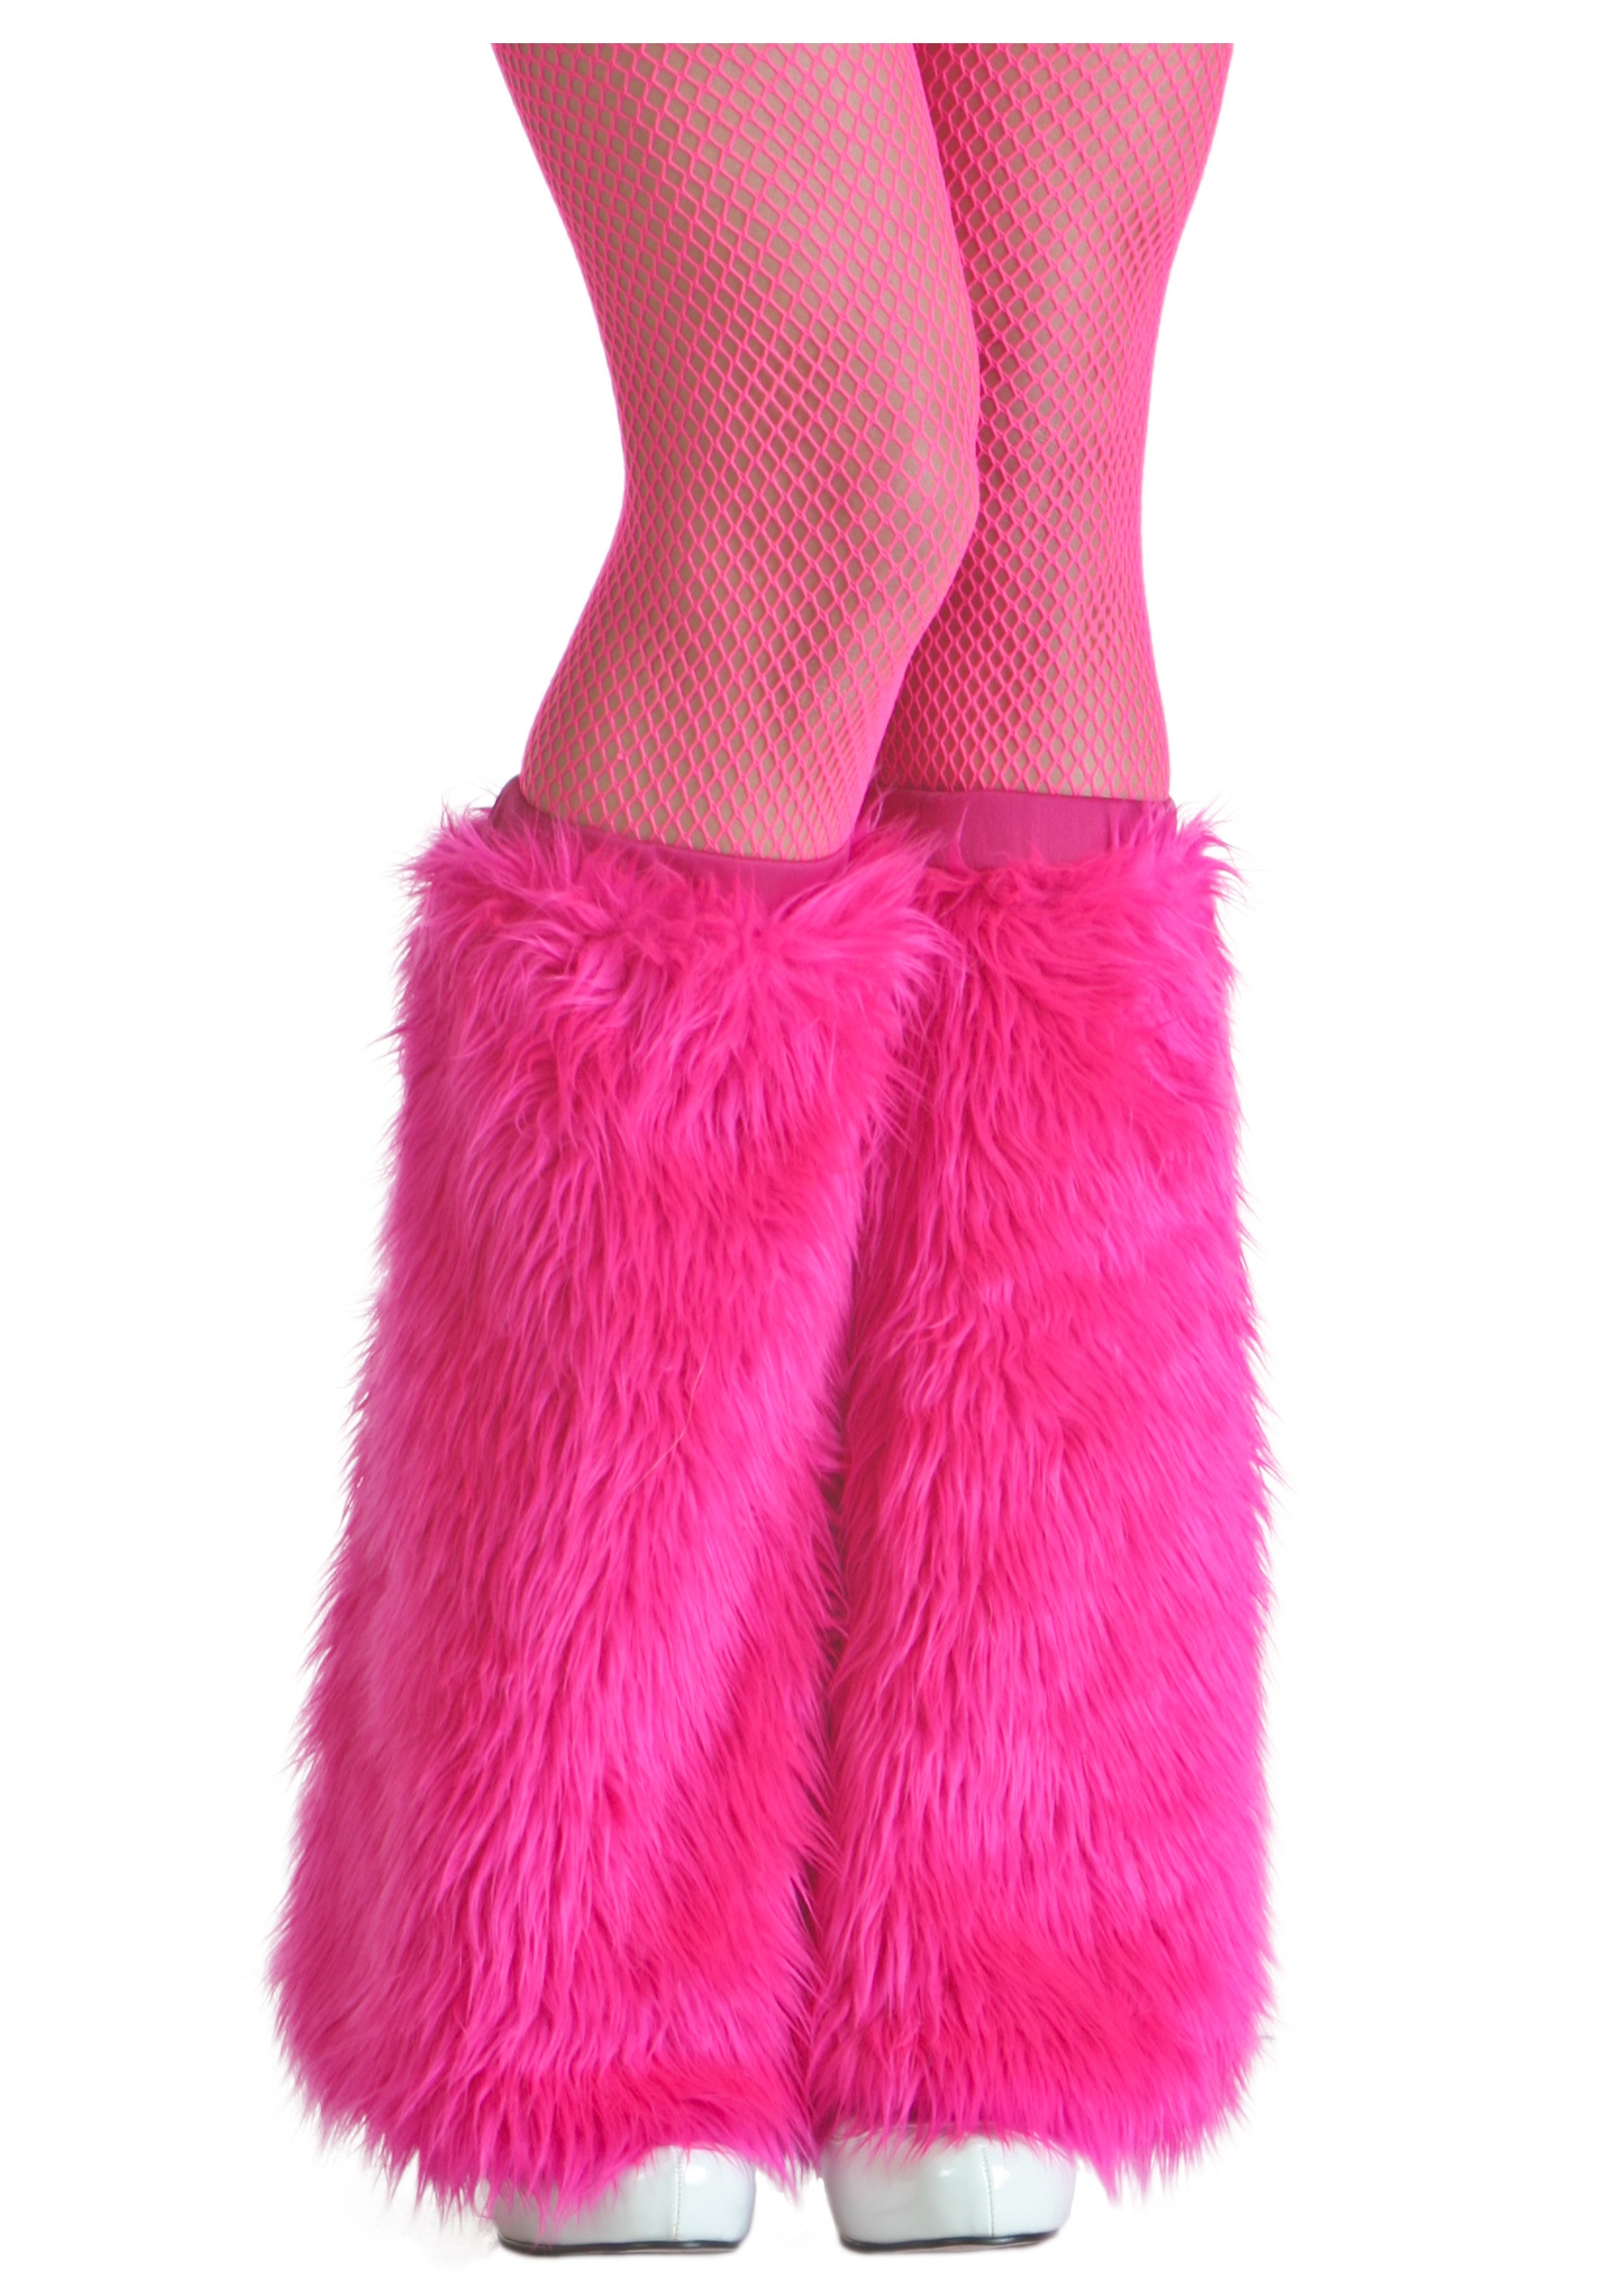 fur boot covers